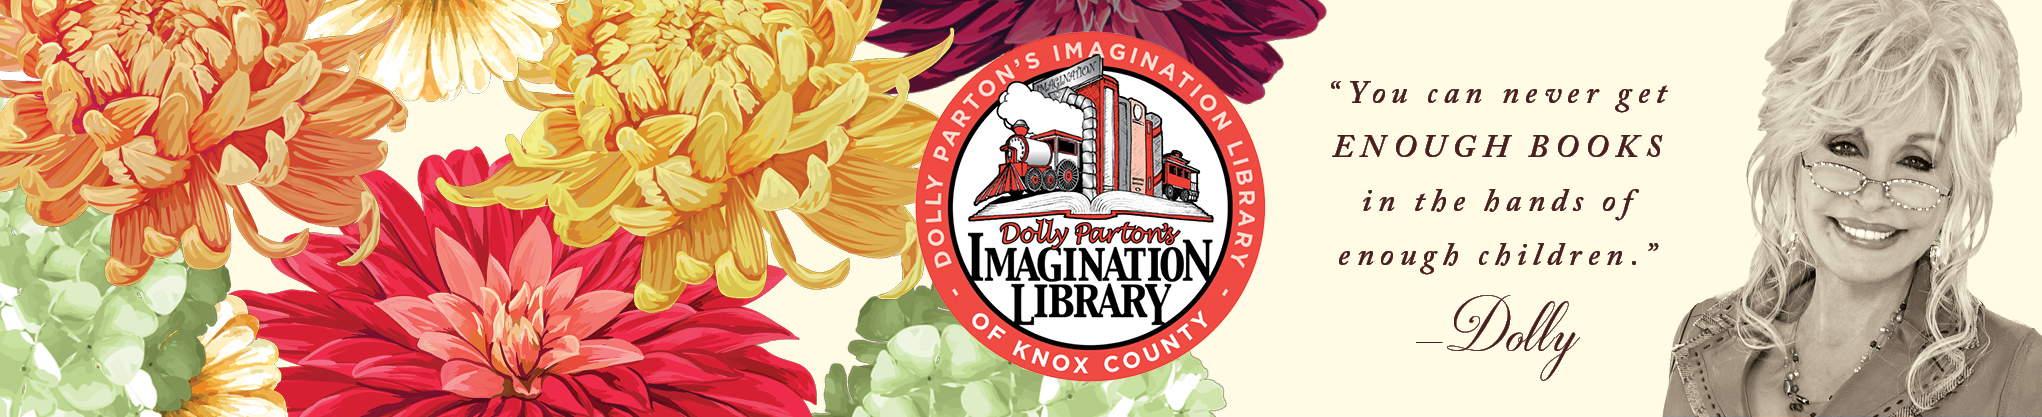 Imagination Library with photo of Dolly Parton - "You can never get enough books in the hands of enough children."